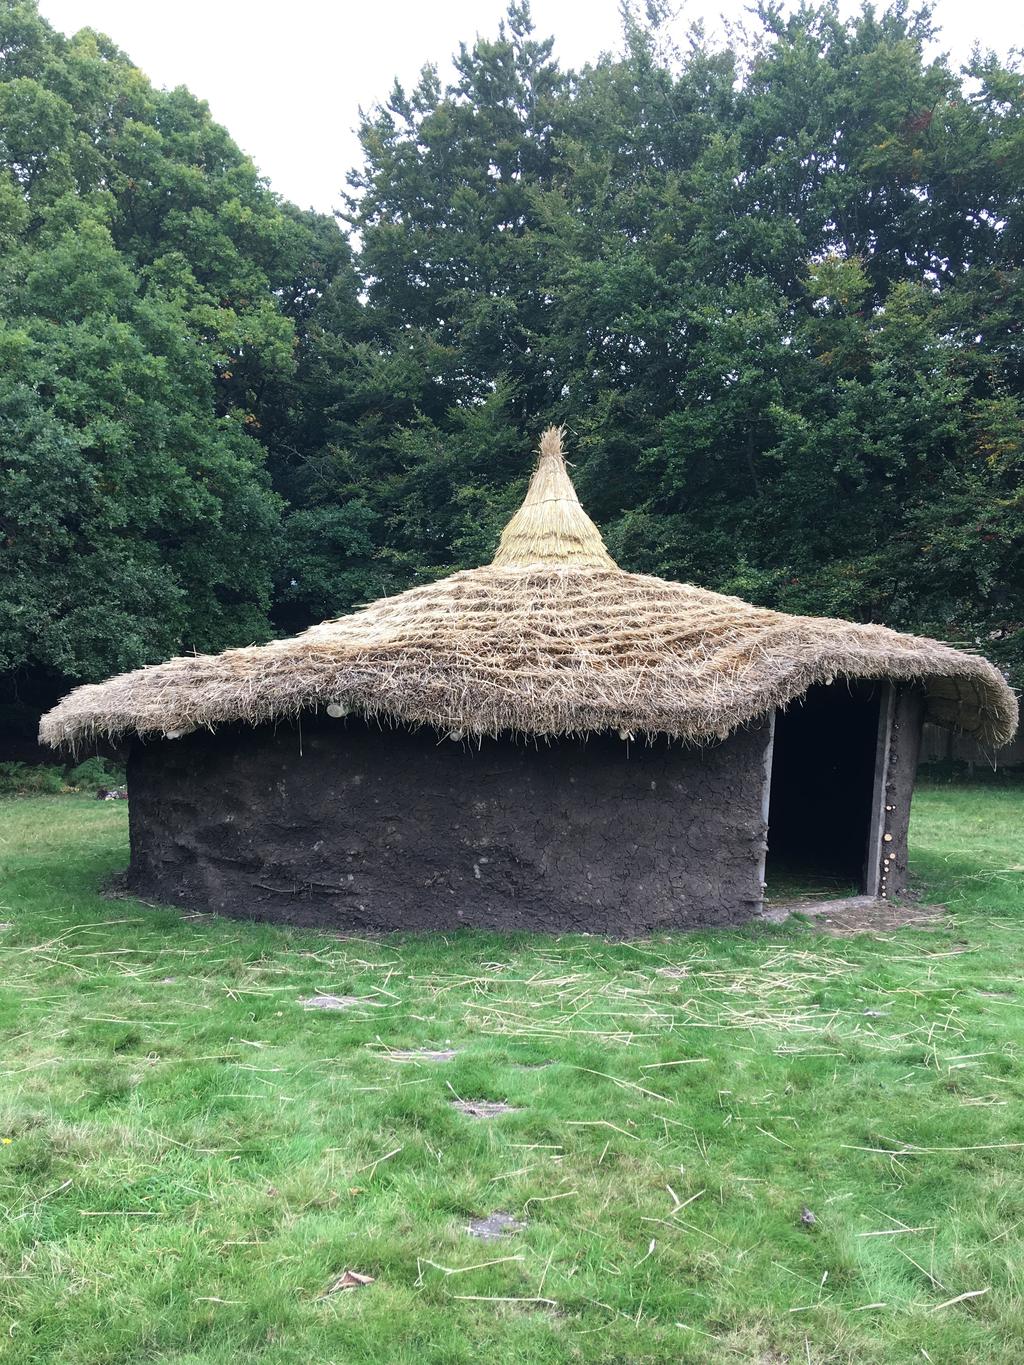 What were round houses? Celts and previous generations lived together in family groups in these one roomed round houses.